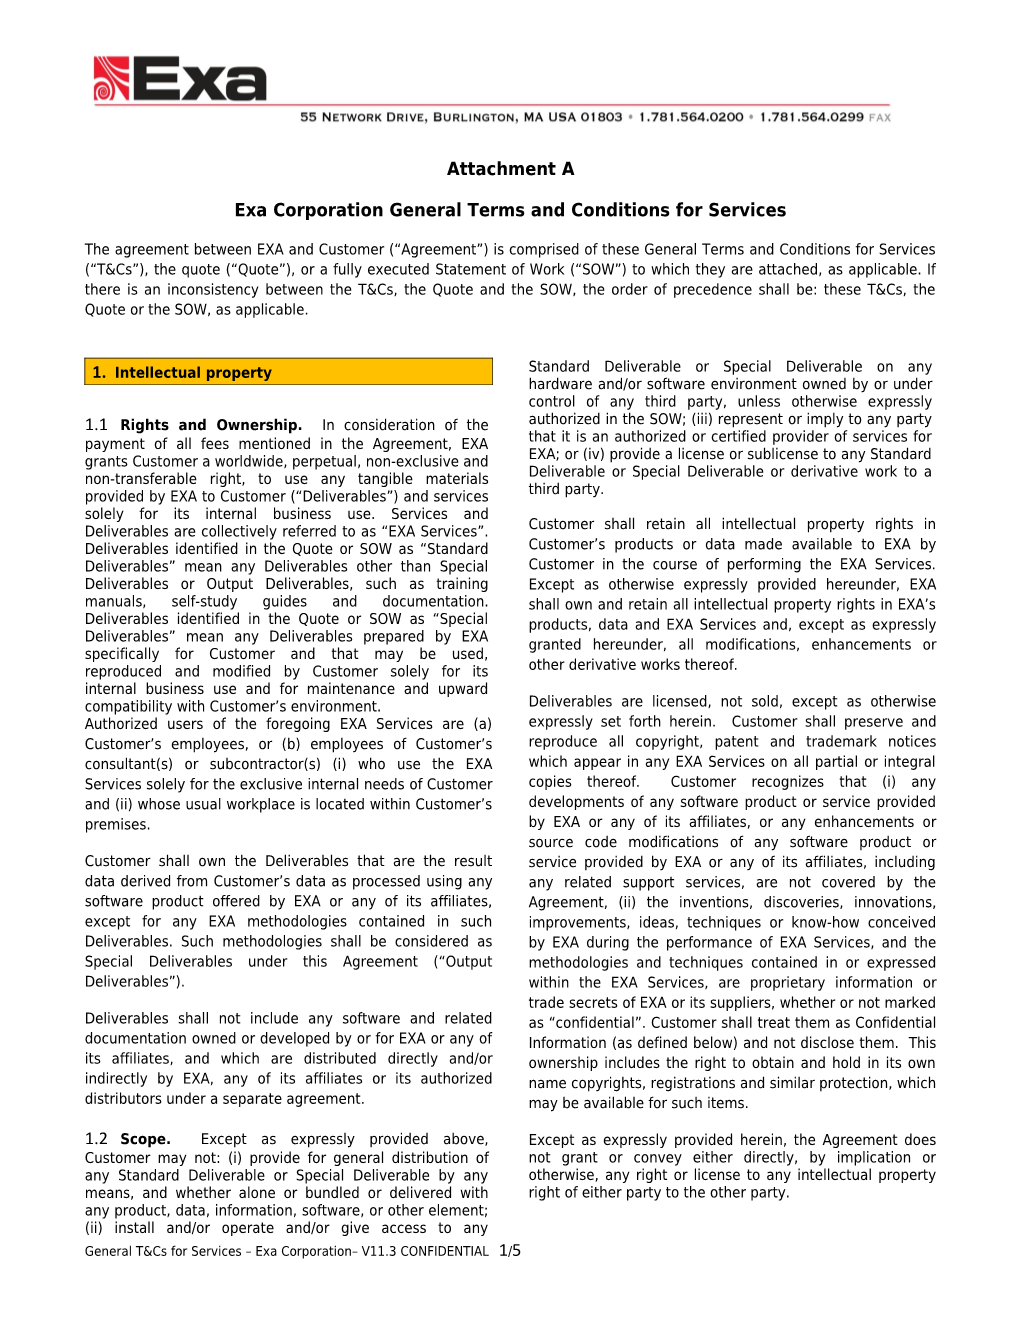 Exa Corporation General Terms and Conditions for Services